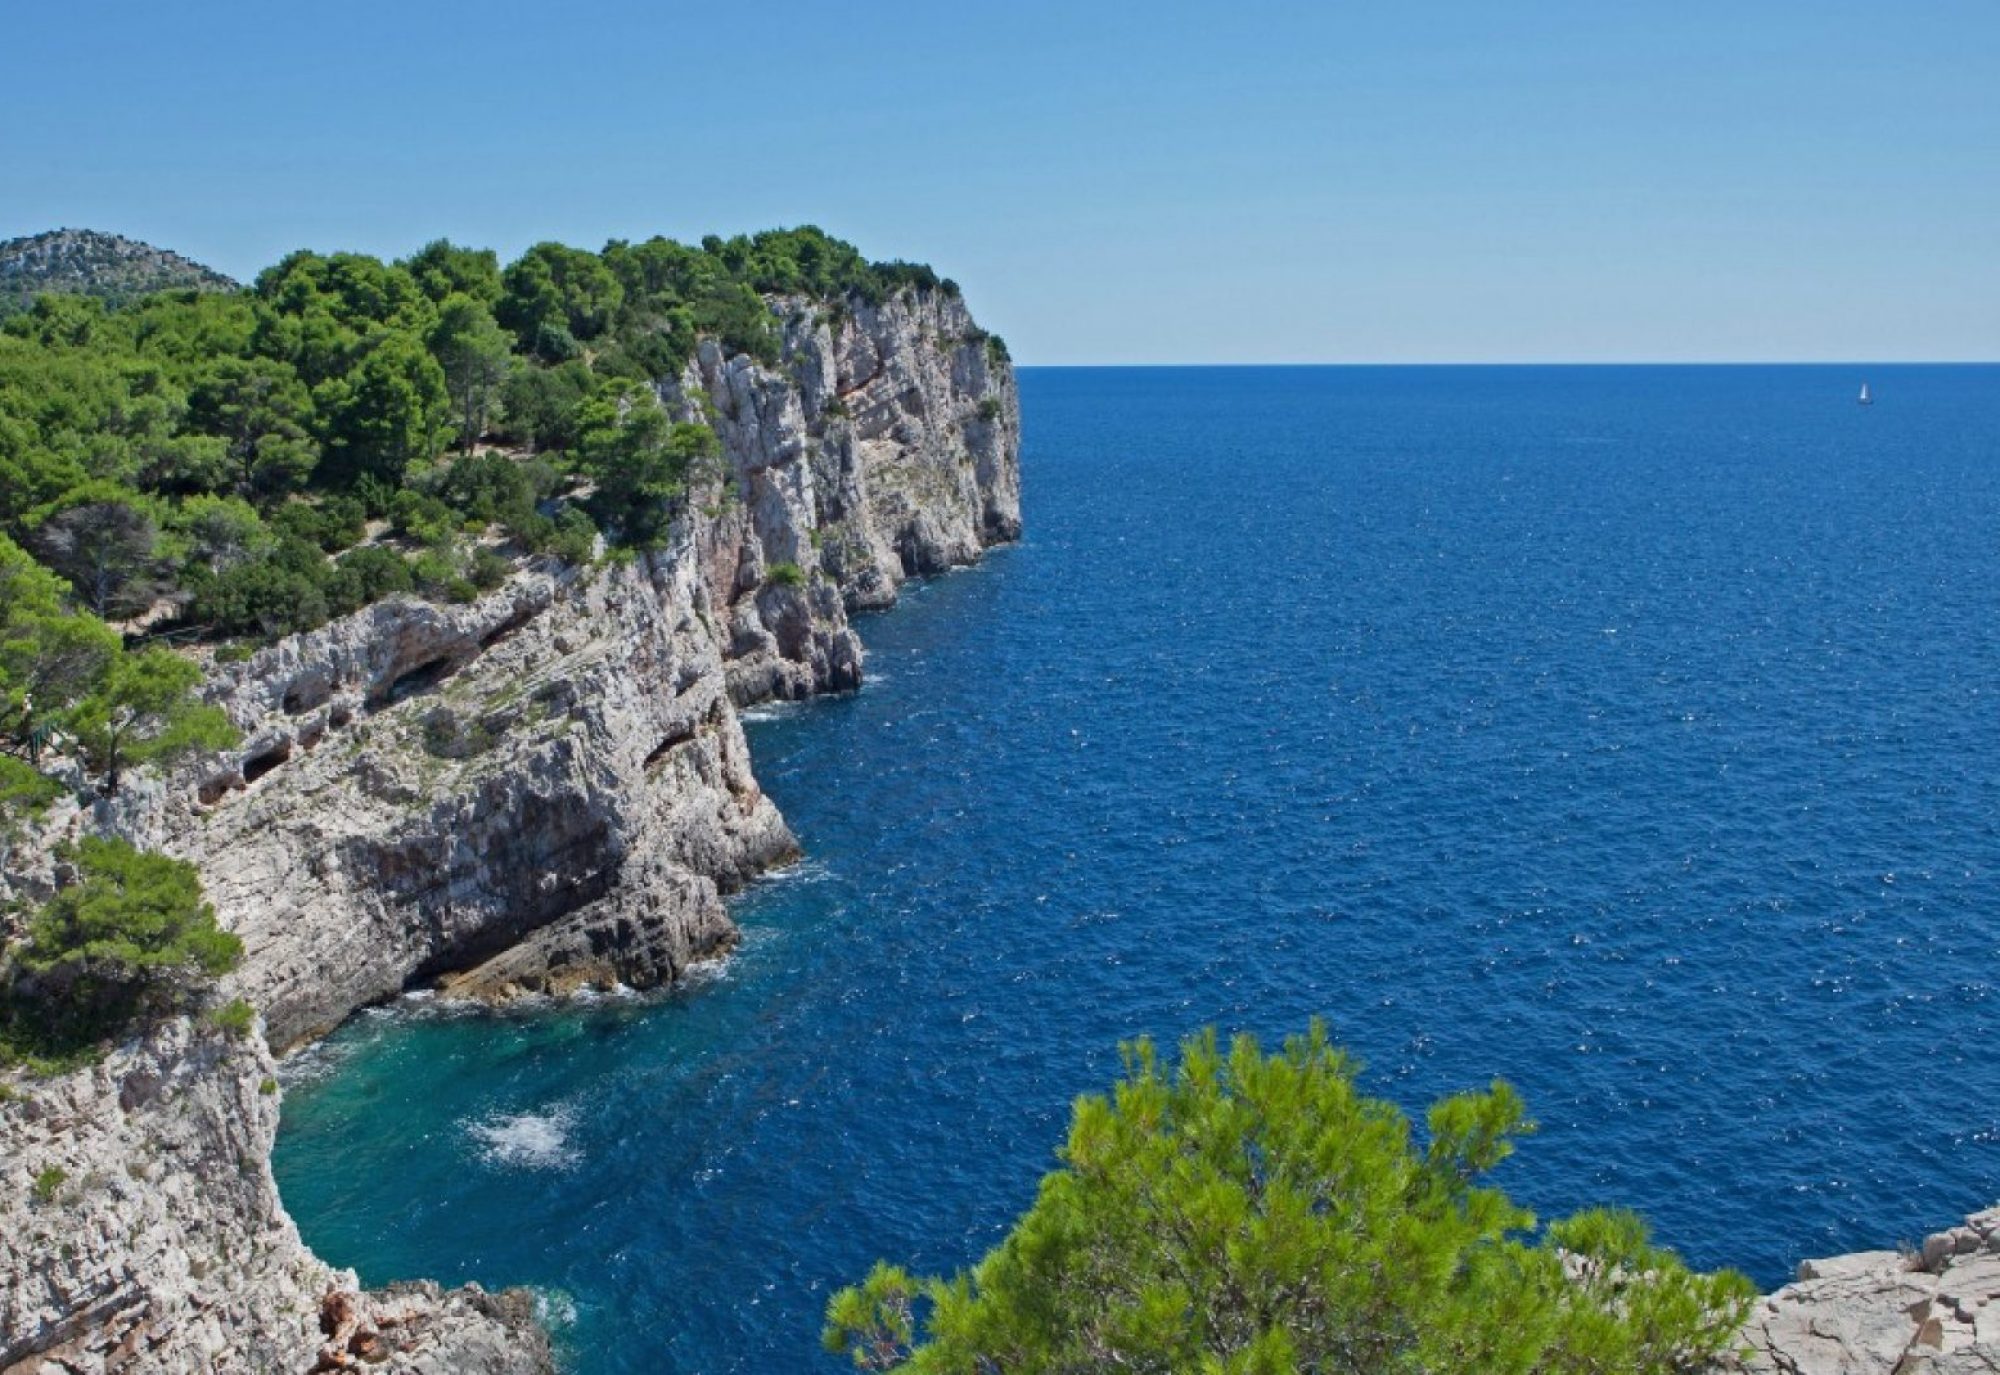 Climate Change and Preservation of Marine Ecosystems of the Adriatic Sea